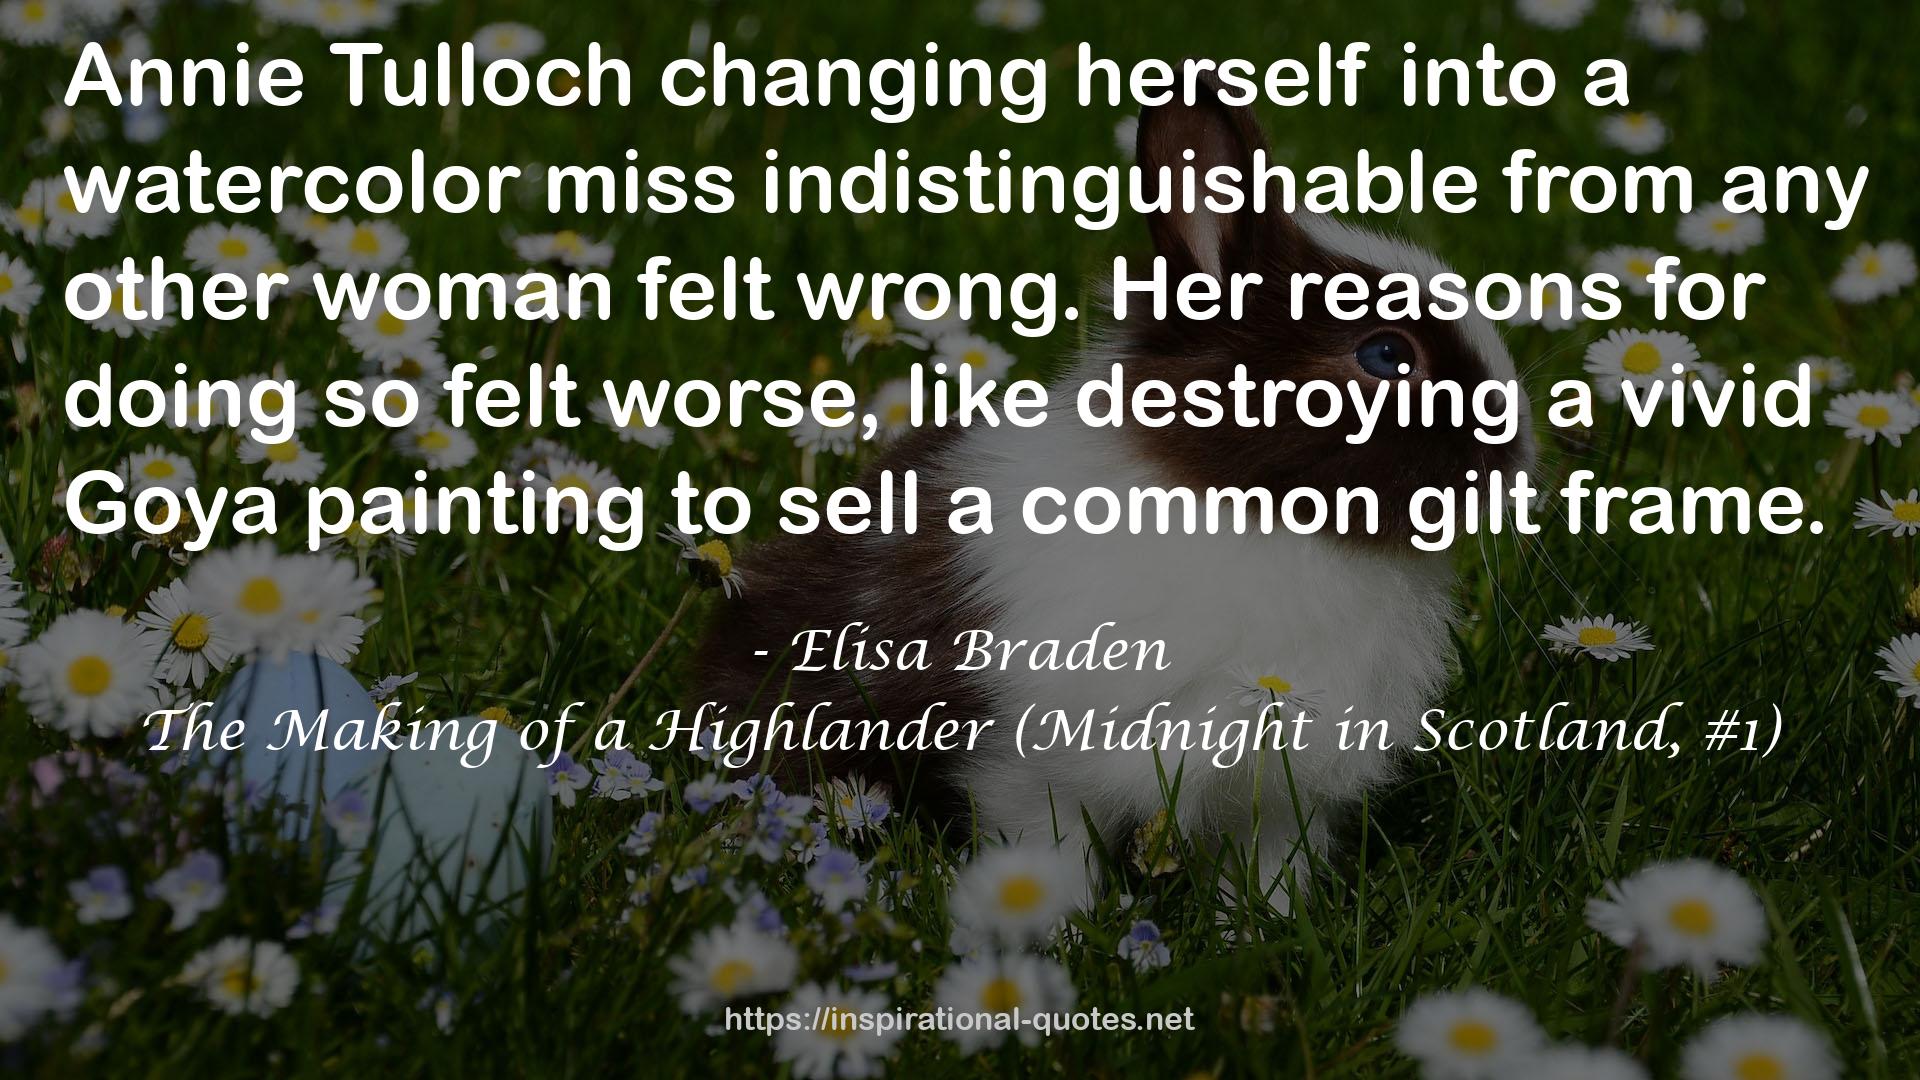 The Making of a Highlander (Midnight in Scotland, #1) QUOTES